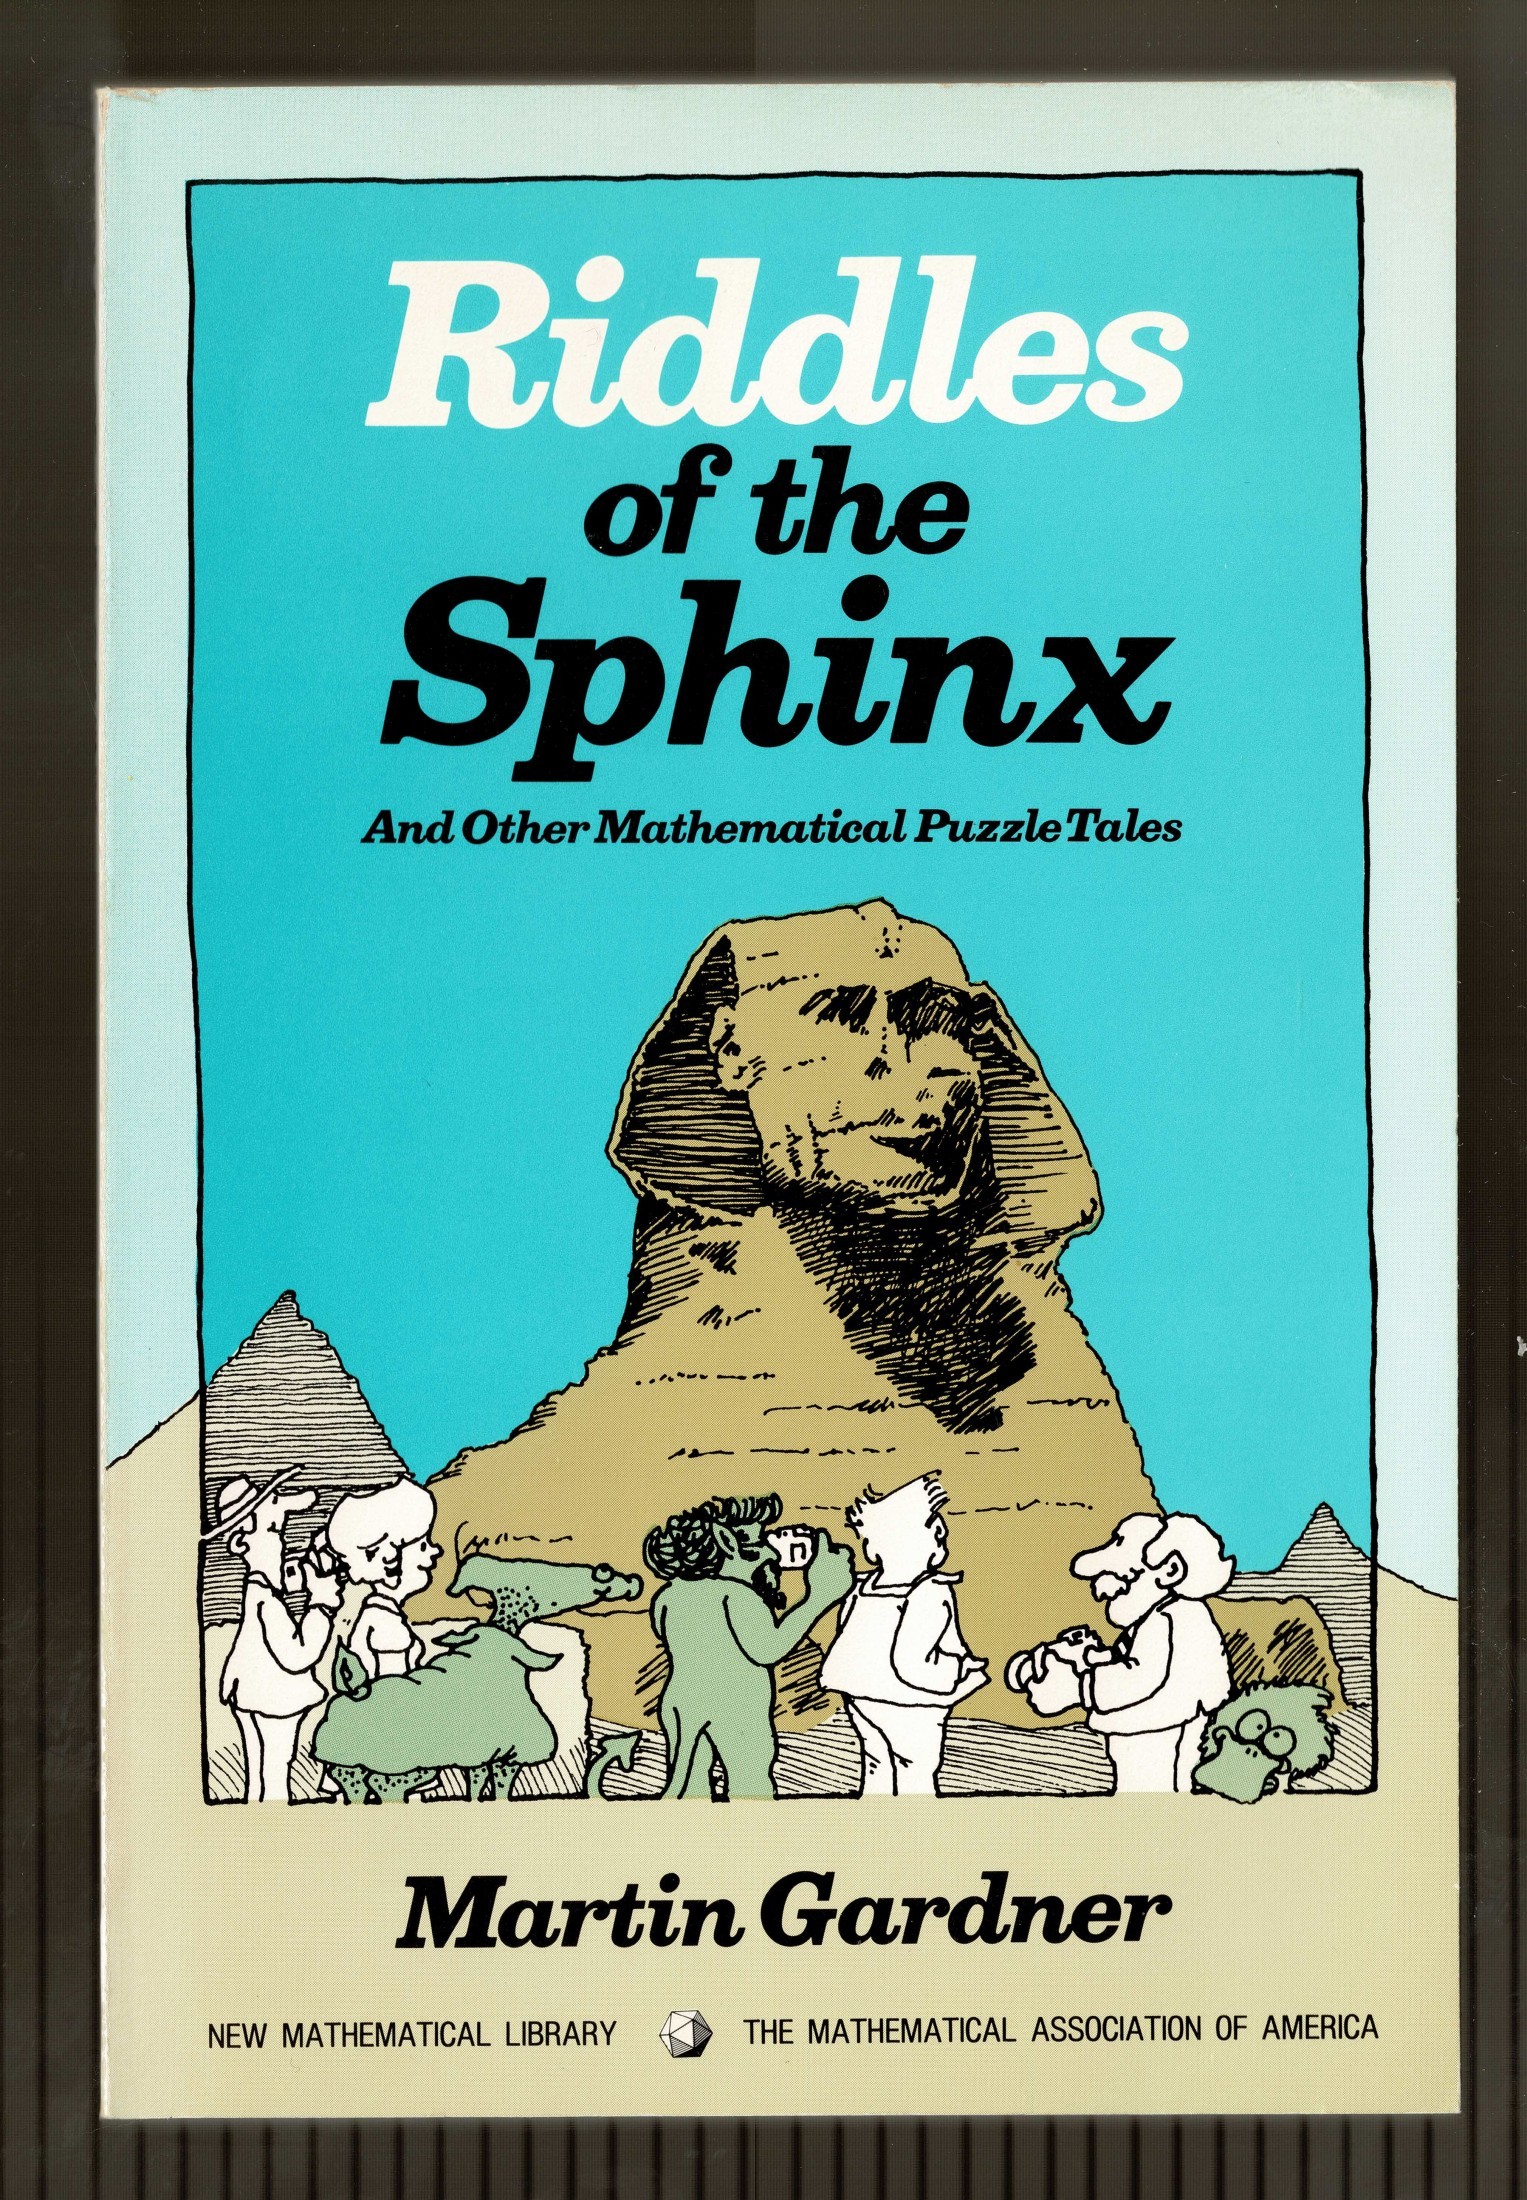 Riddles of the Sphinx: And Other Mathematical Puzzle Tales